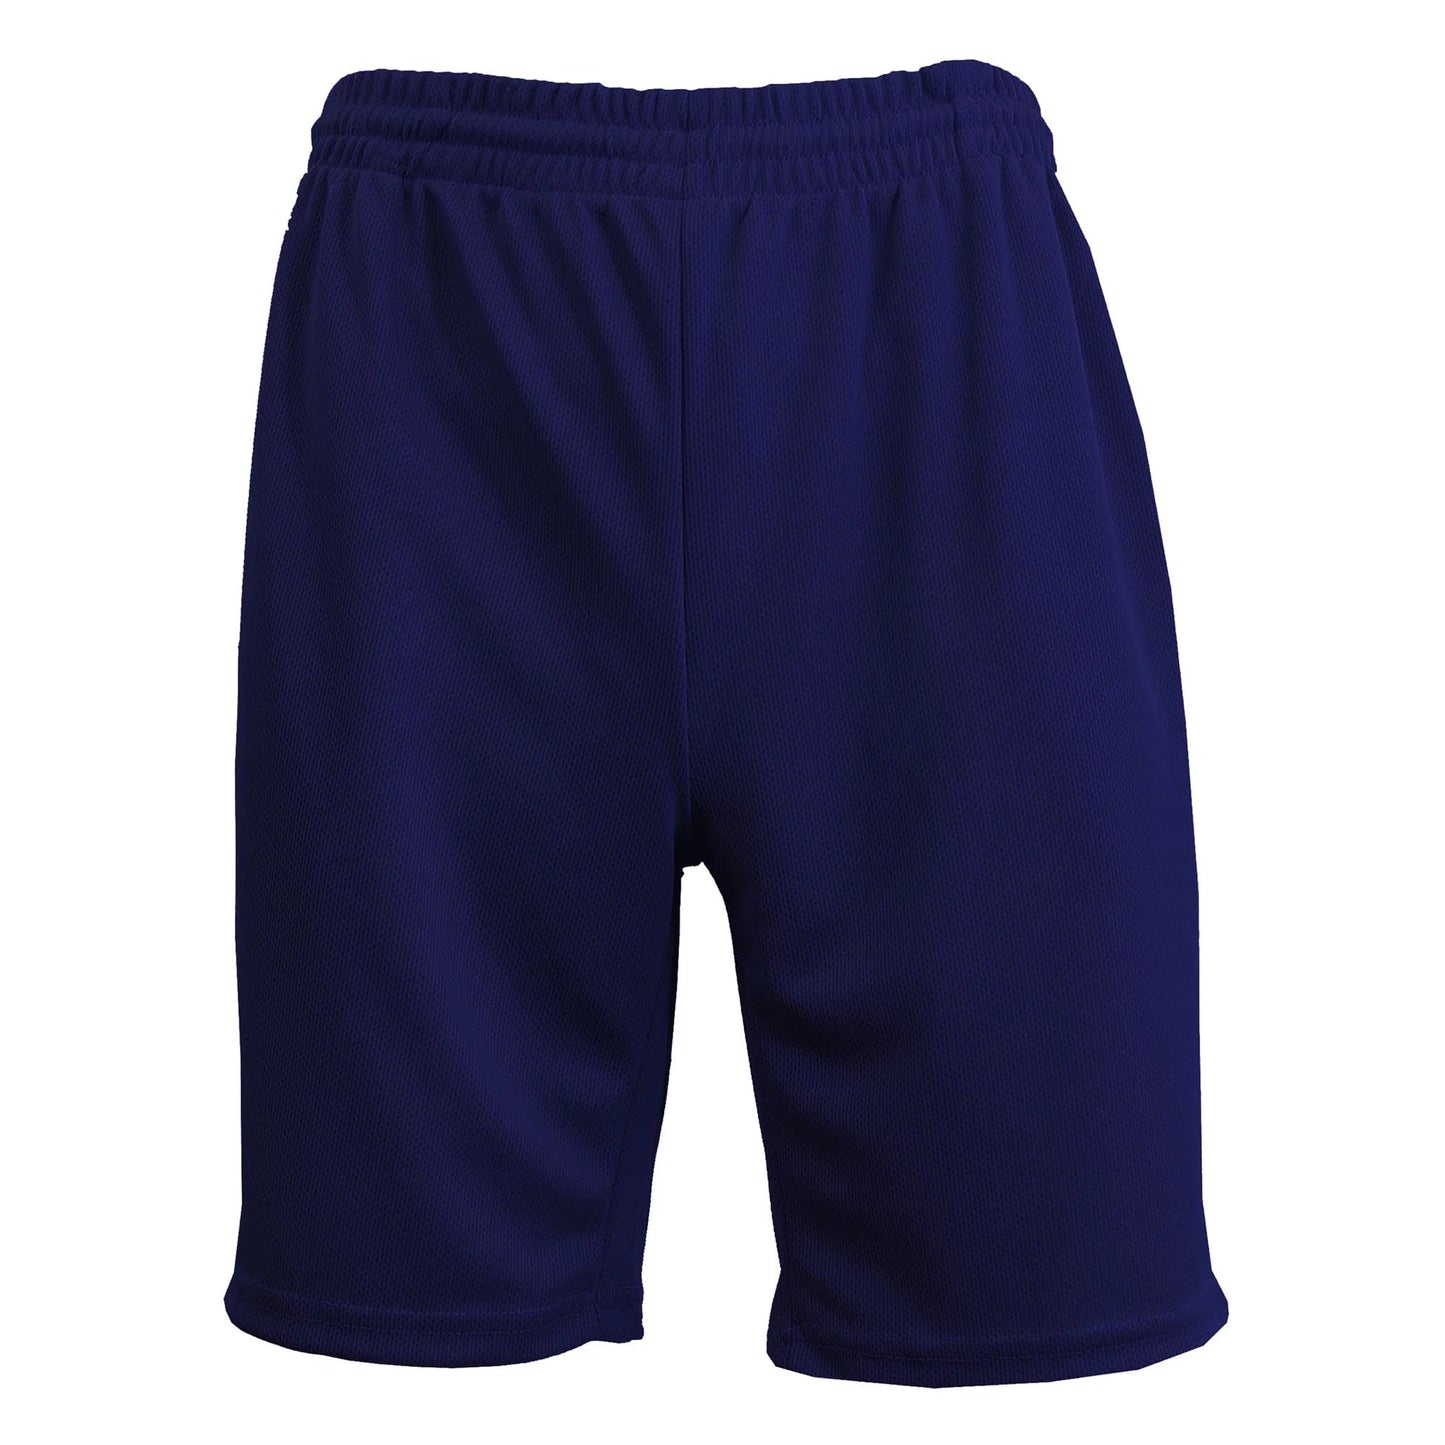 Men's Moisture-Wicking Lightweight Breathable Active Mesh Shorts (S-2XL) - GalaxybyHarvic